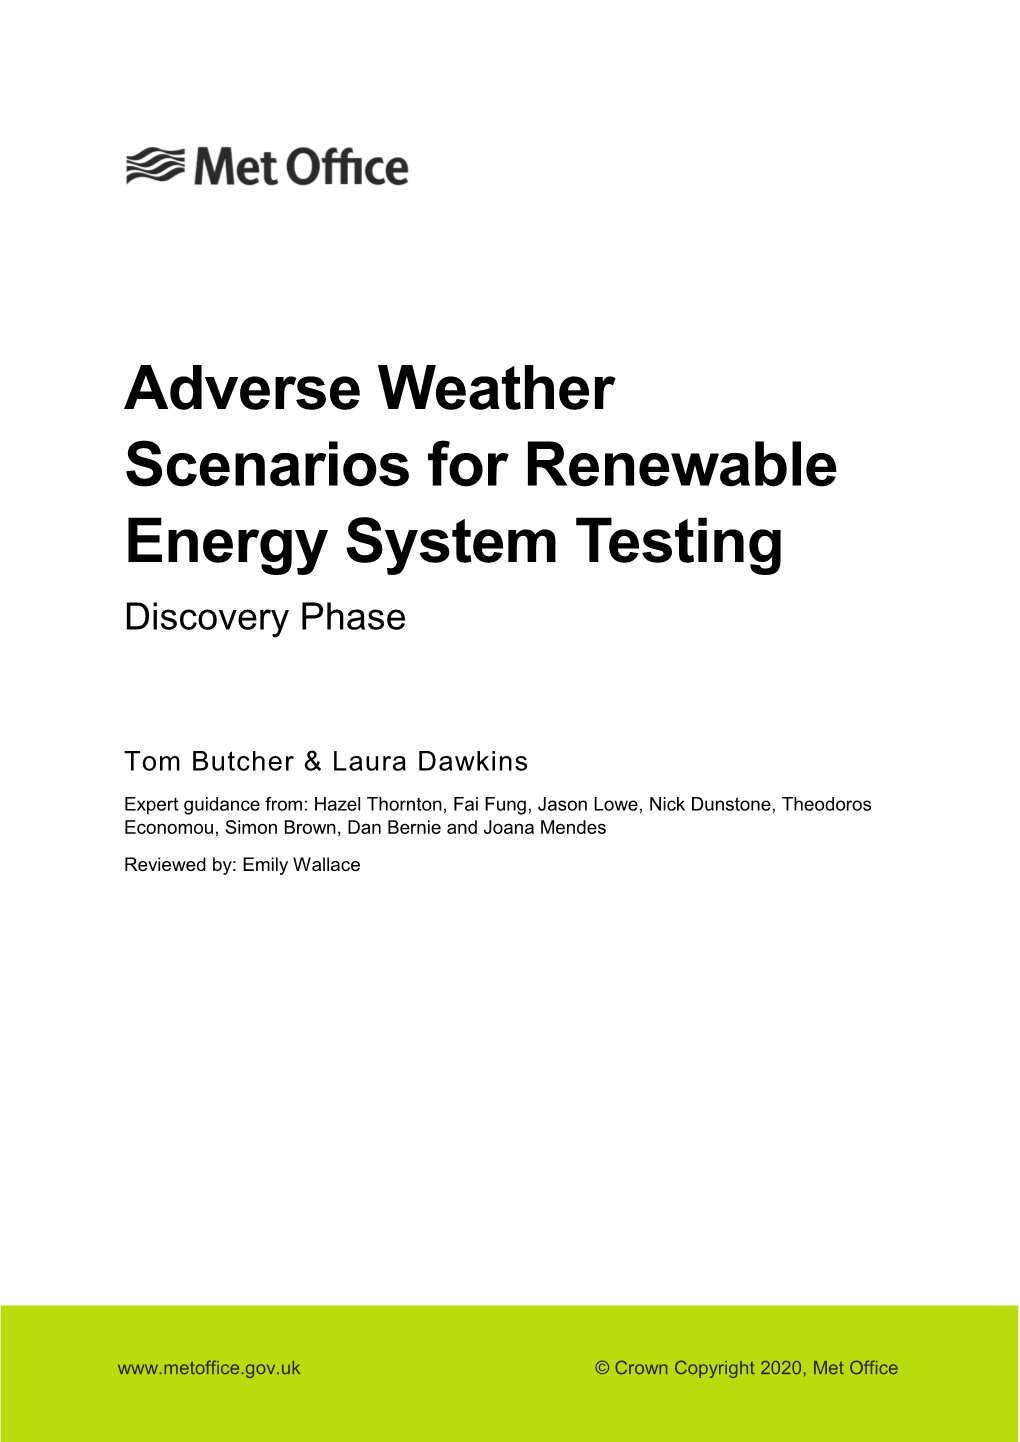 Adverse Weather Scenarios for Renewable Energy System Testing